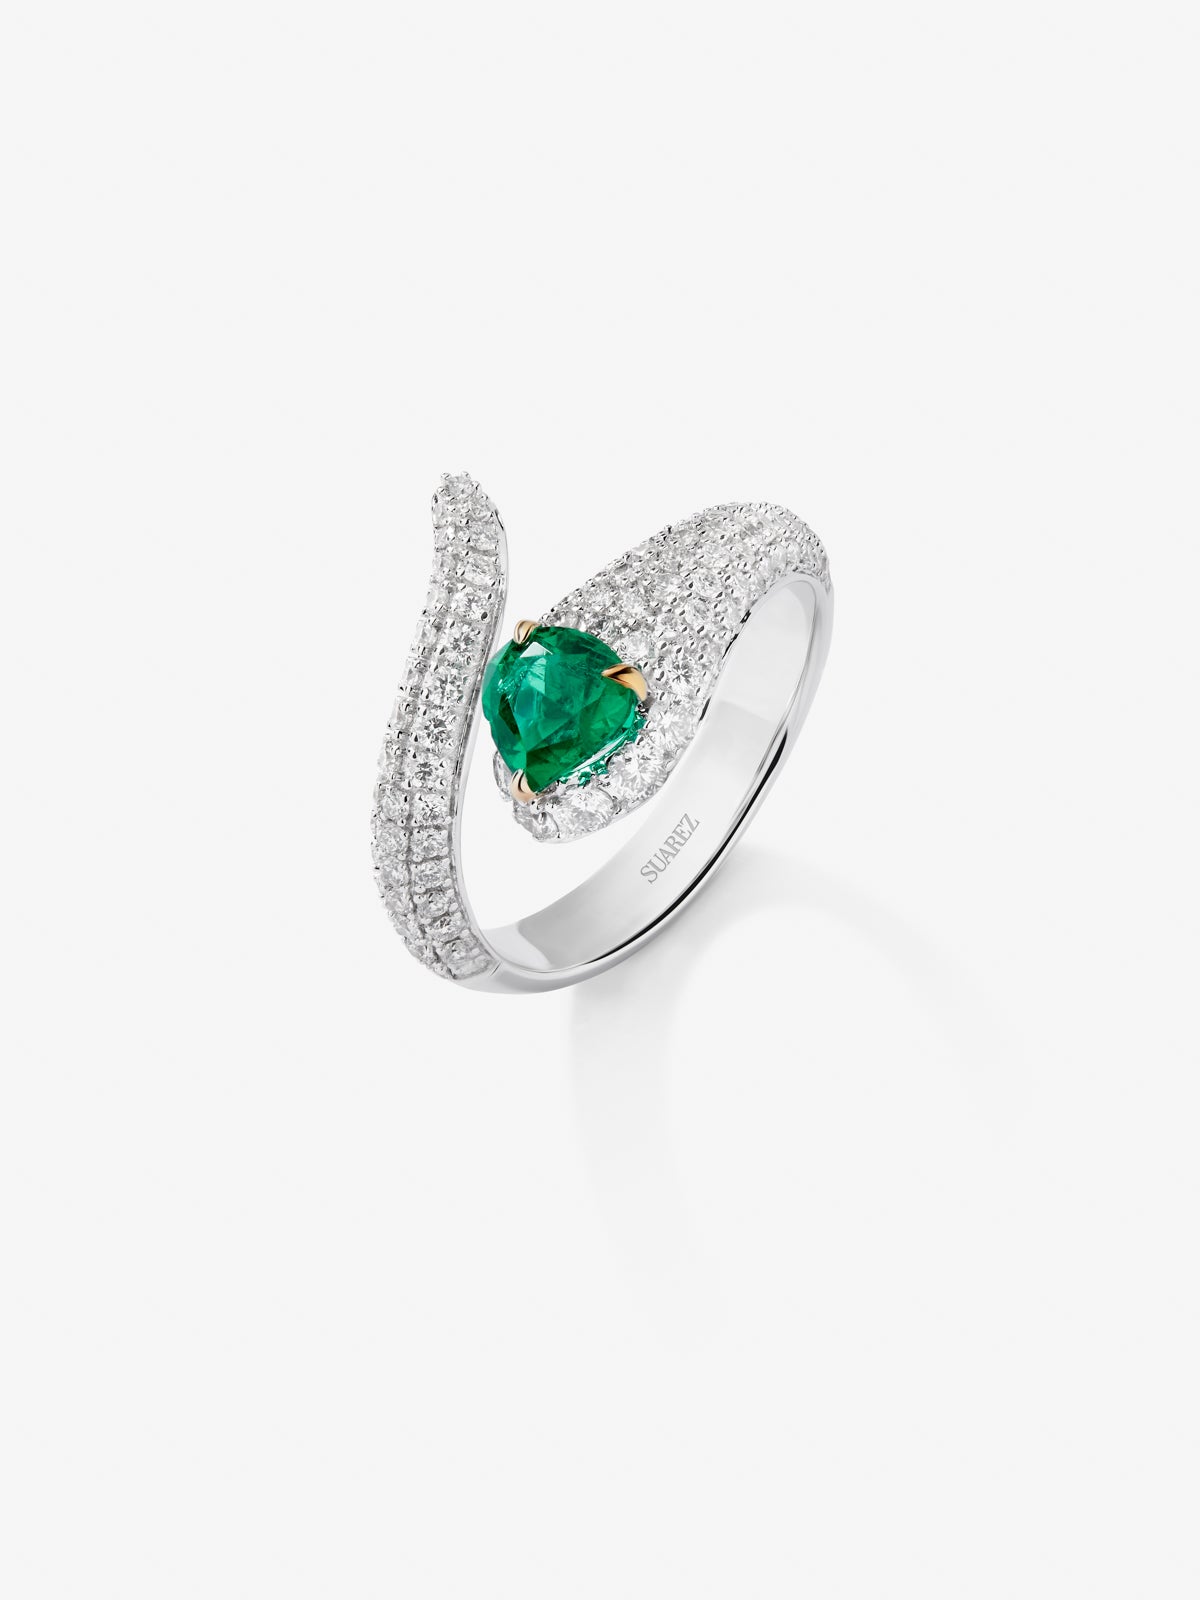 You and me ring in 18K white gold with pear-cut green emerald of 0.64 cts and 92 brilliant-cut diamonds with a total of 0.91 cts